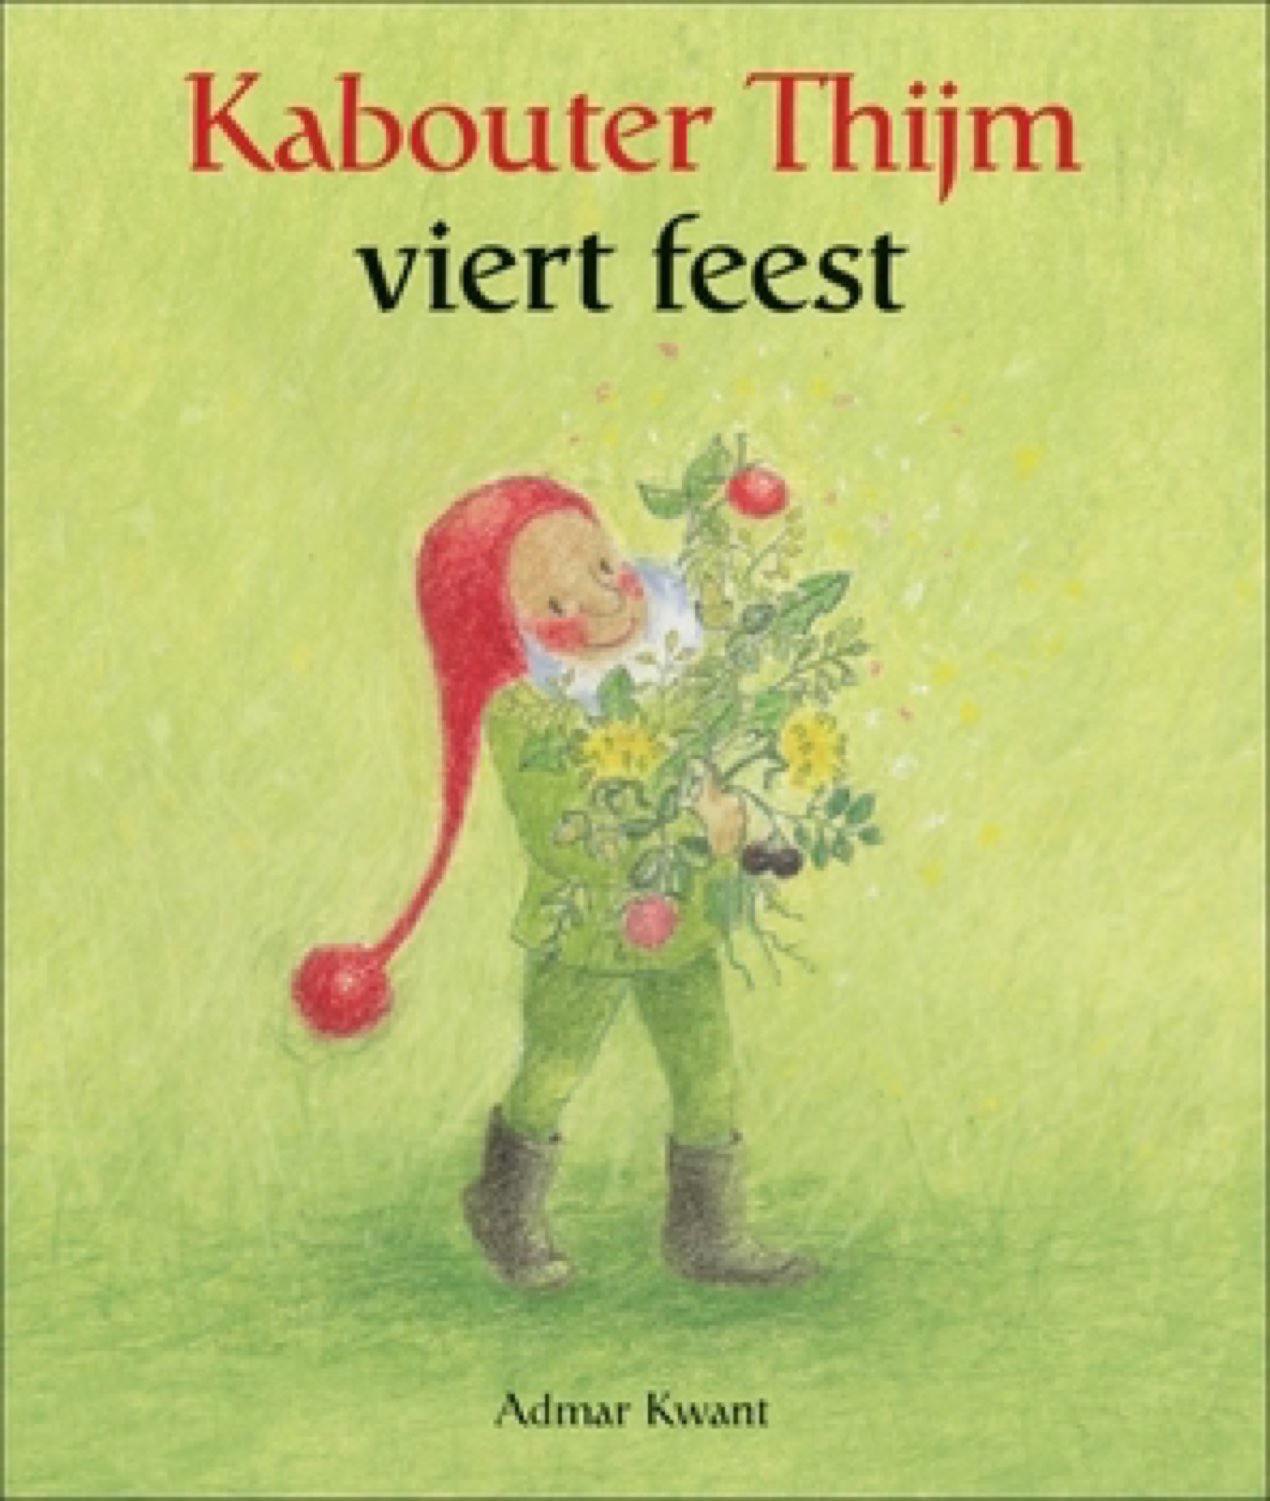 admar kwant kabouter thijm feest ginger fairy